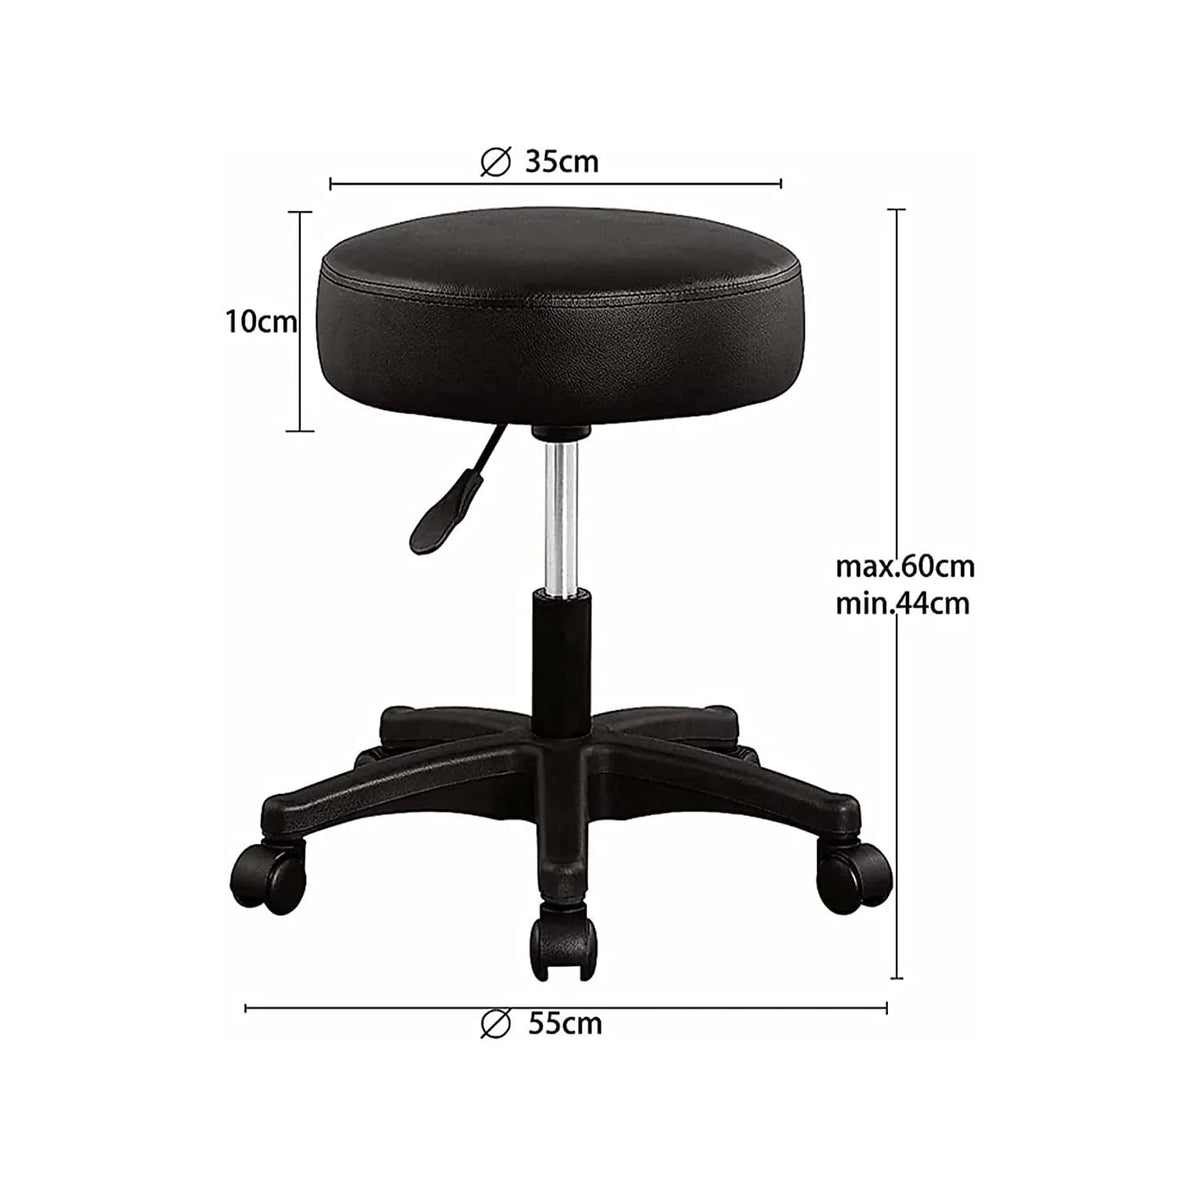 SmileSellers Height-Adjustable revolving Stool with 360-degree pivoting caster wheels |great for use in Salons, Bar, Schools, Hospital, Offices, Warehouses, Home or garage | black coloured | height extendable from 17 inch to 22 inch